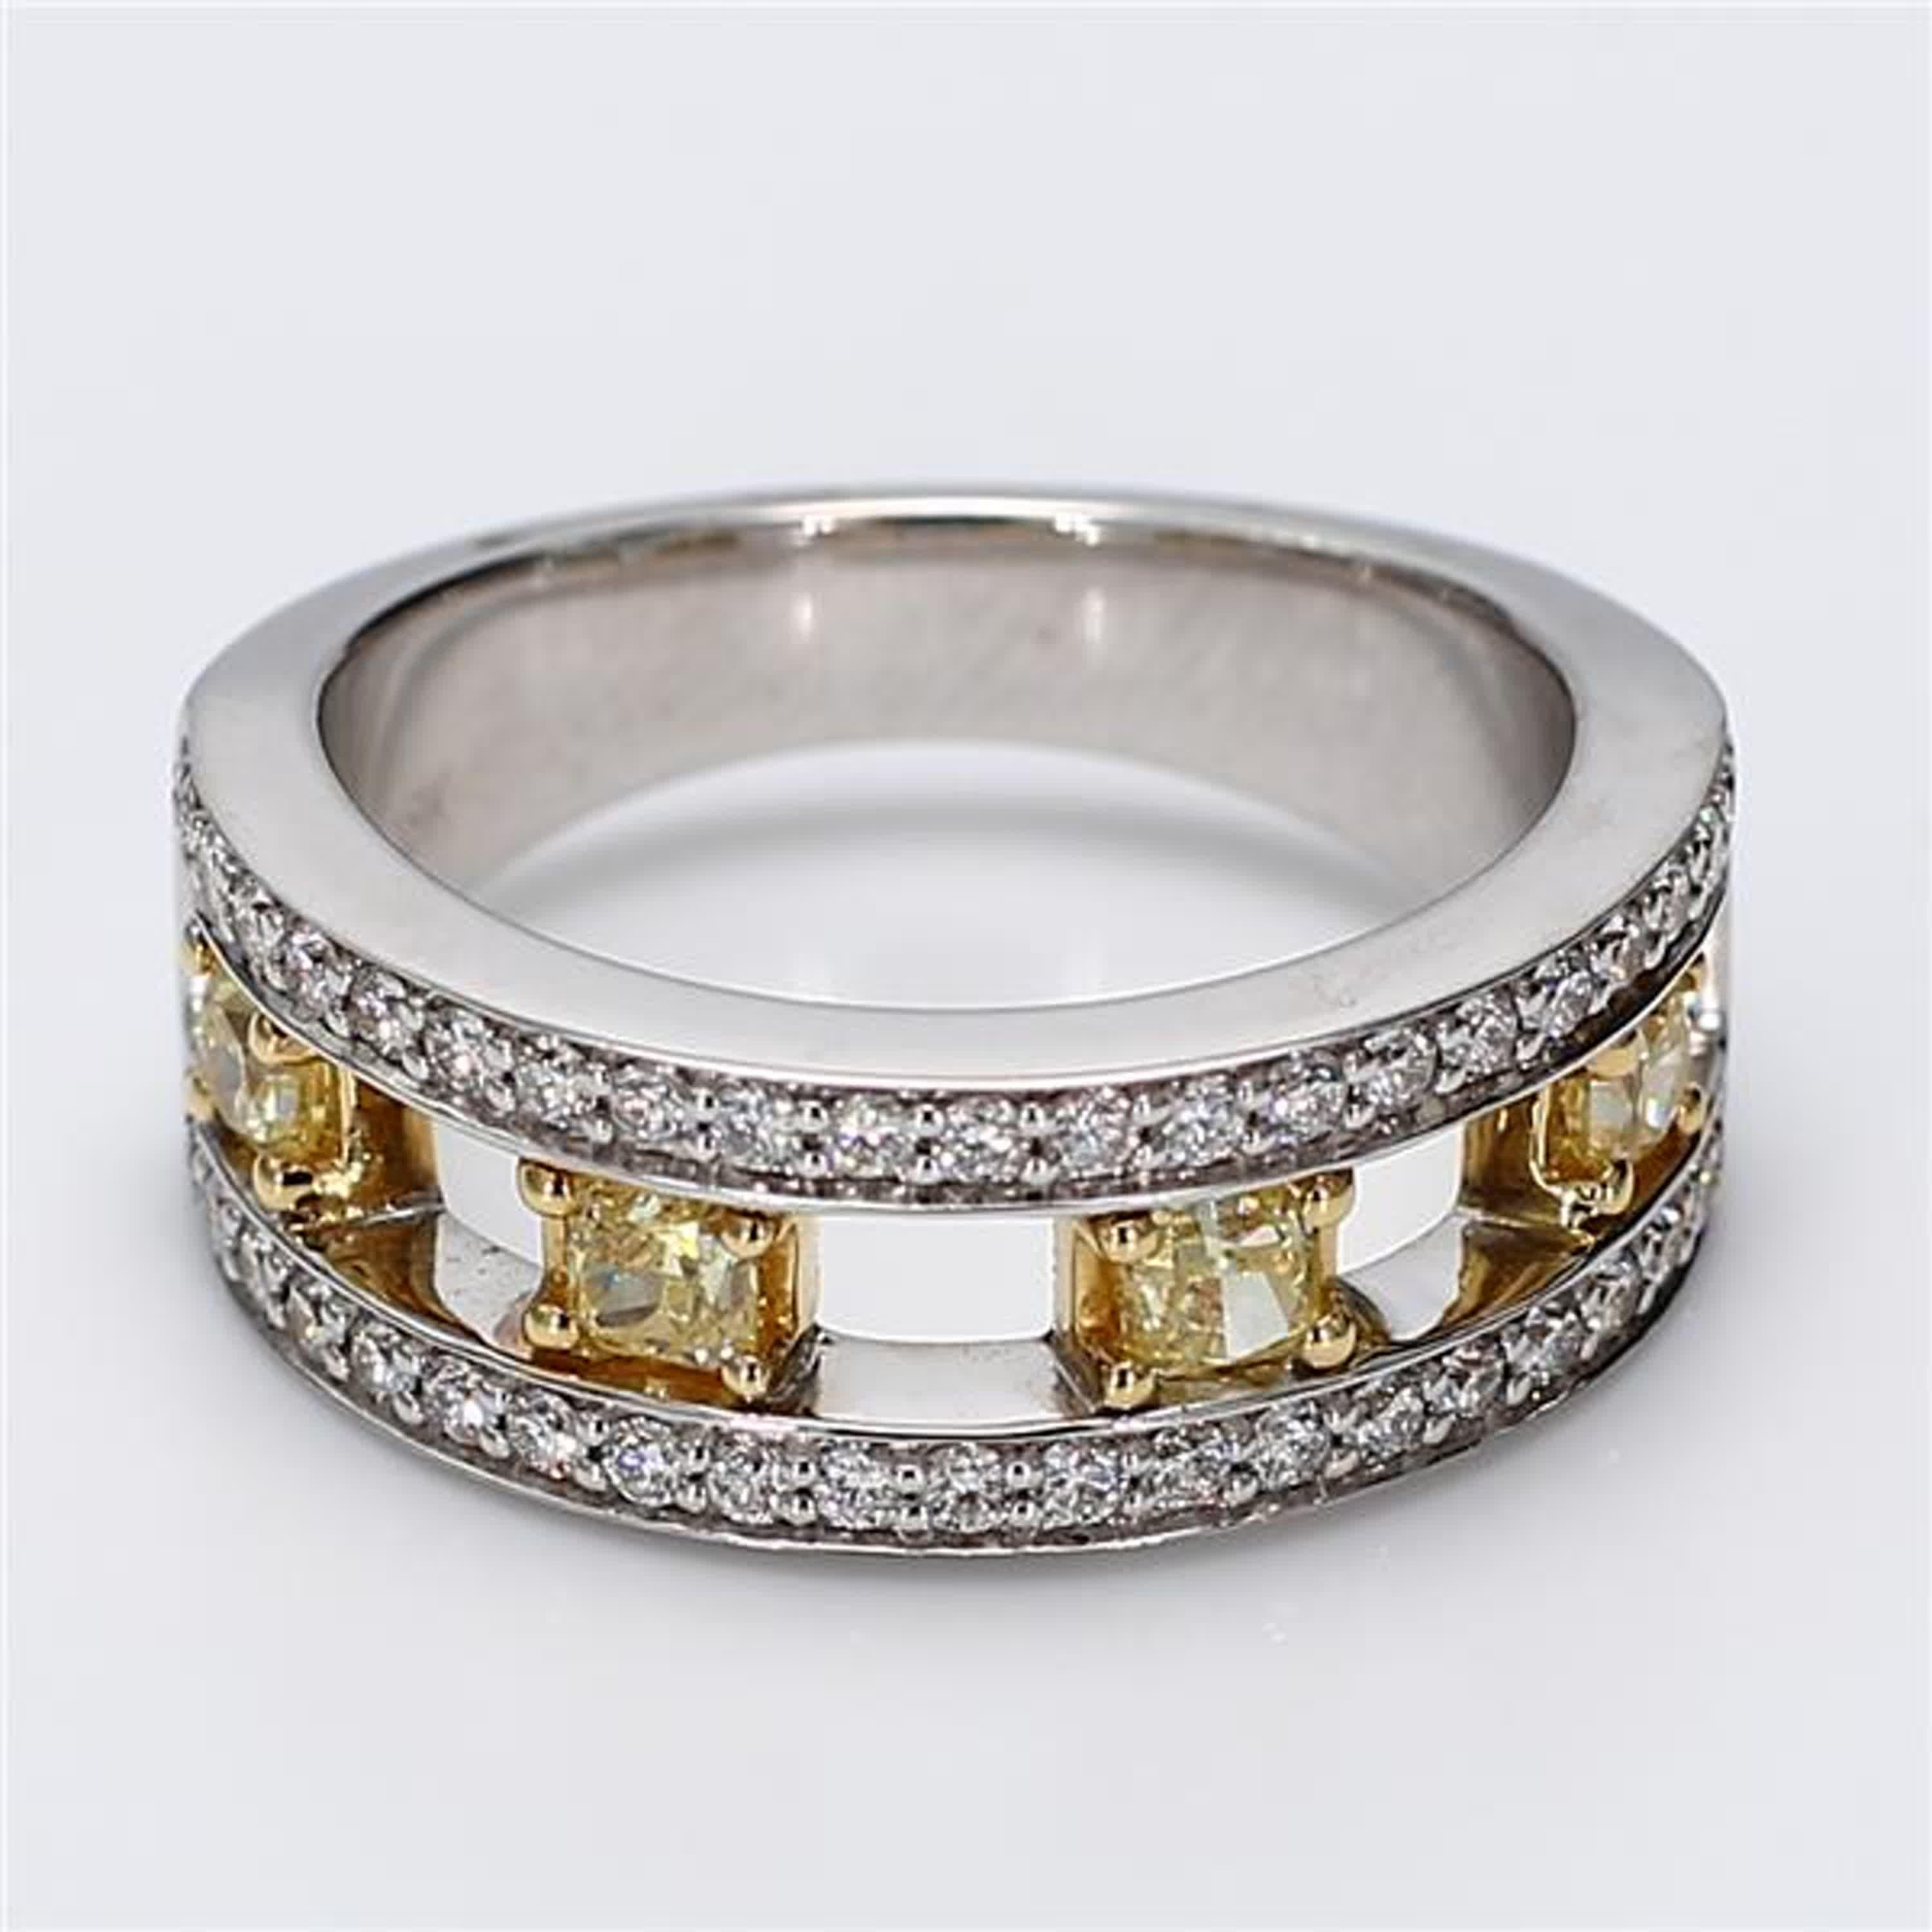 RareGemWorld's classic diamond band. Mounted in a beautiful 18K Yellow and White Gold setting with natural radiant cut yellow diamonds complimented by natural round white diamond melee. This band is guaranteed to impress and enhance your personal